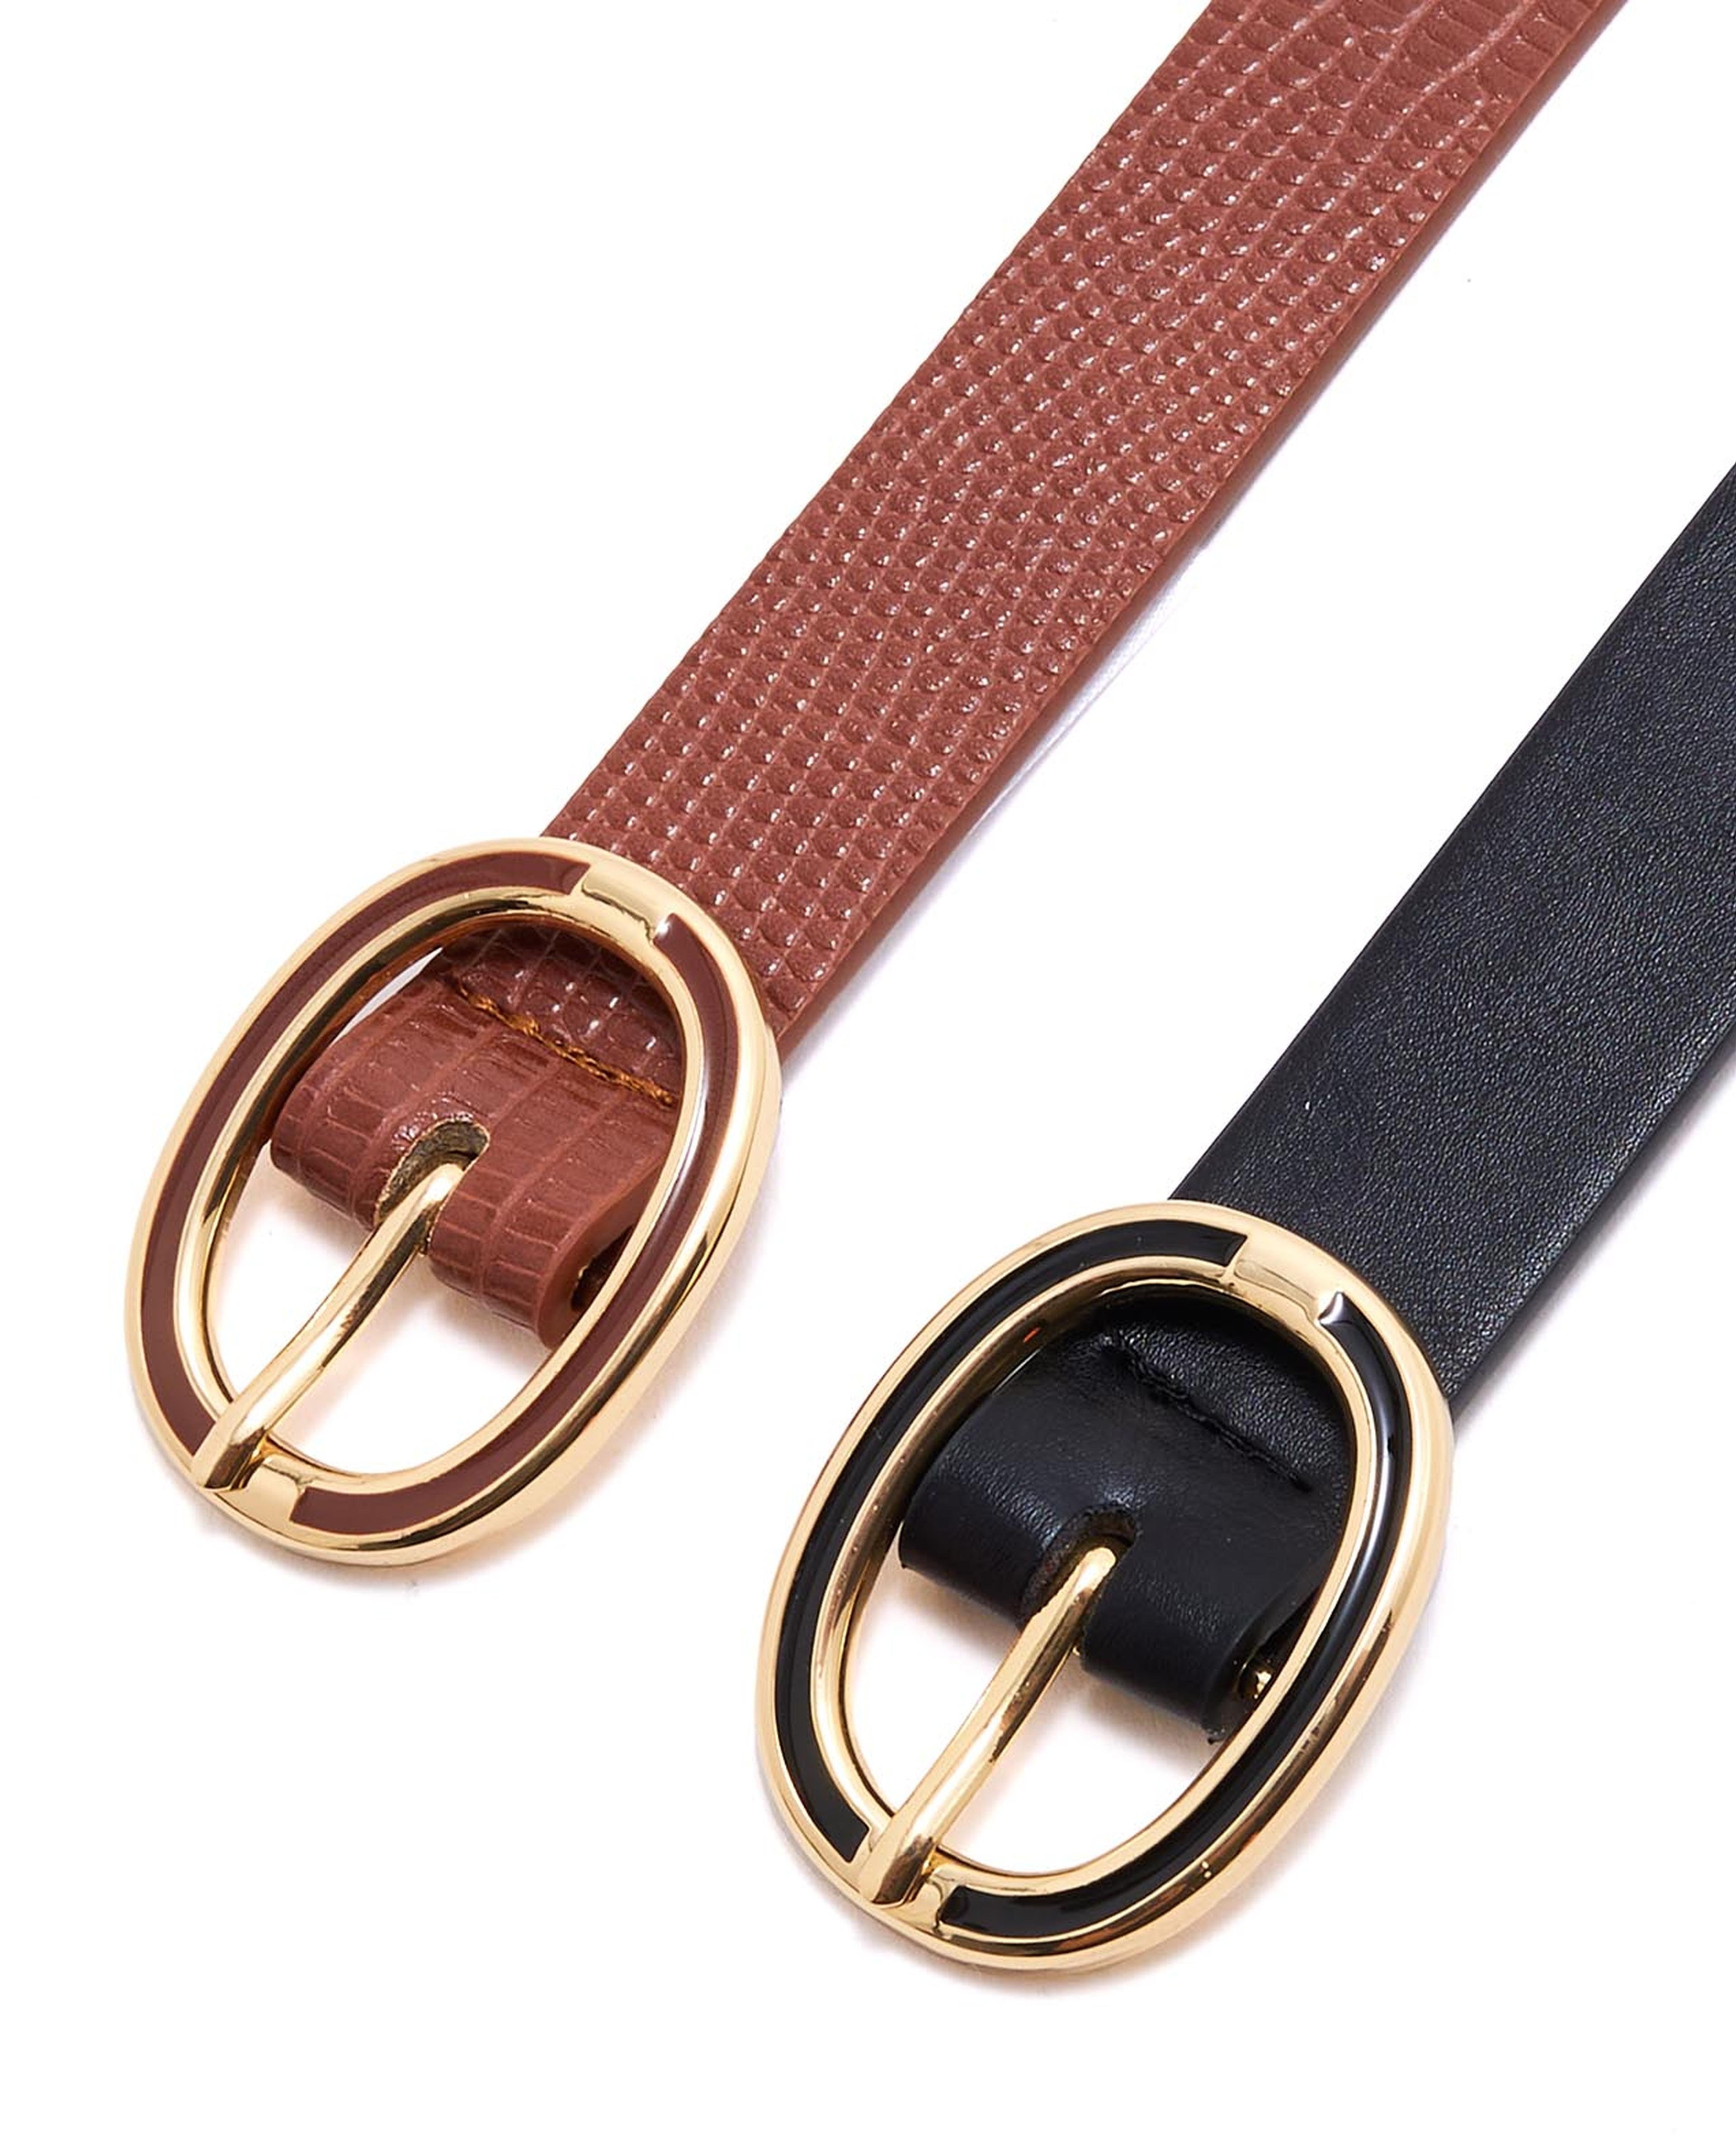 Pack of 2 Oval Buckle Belts